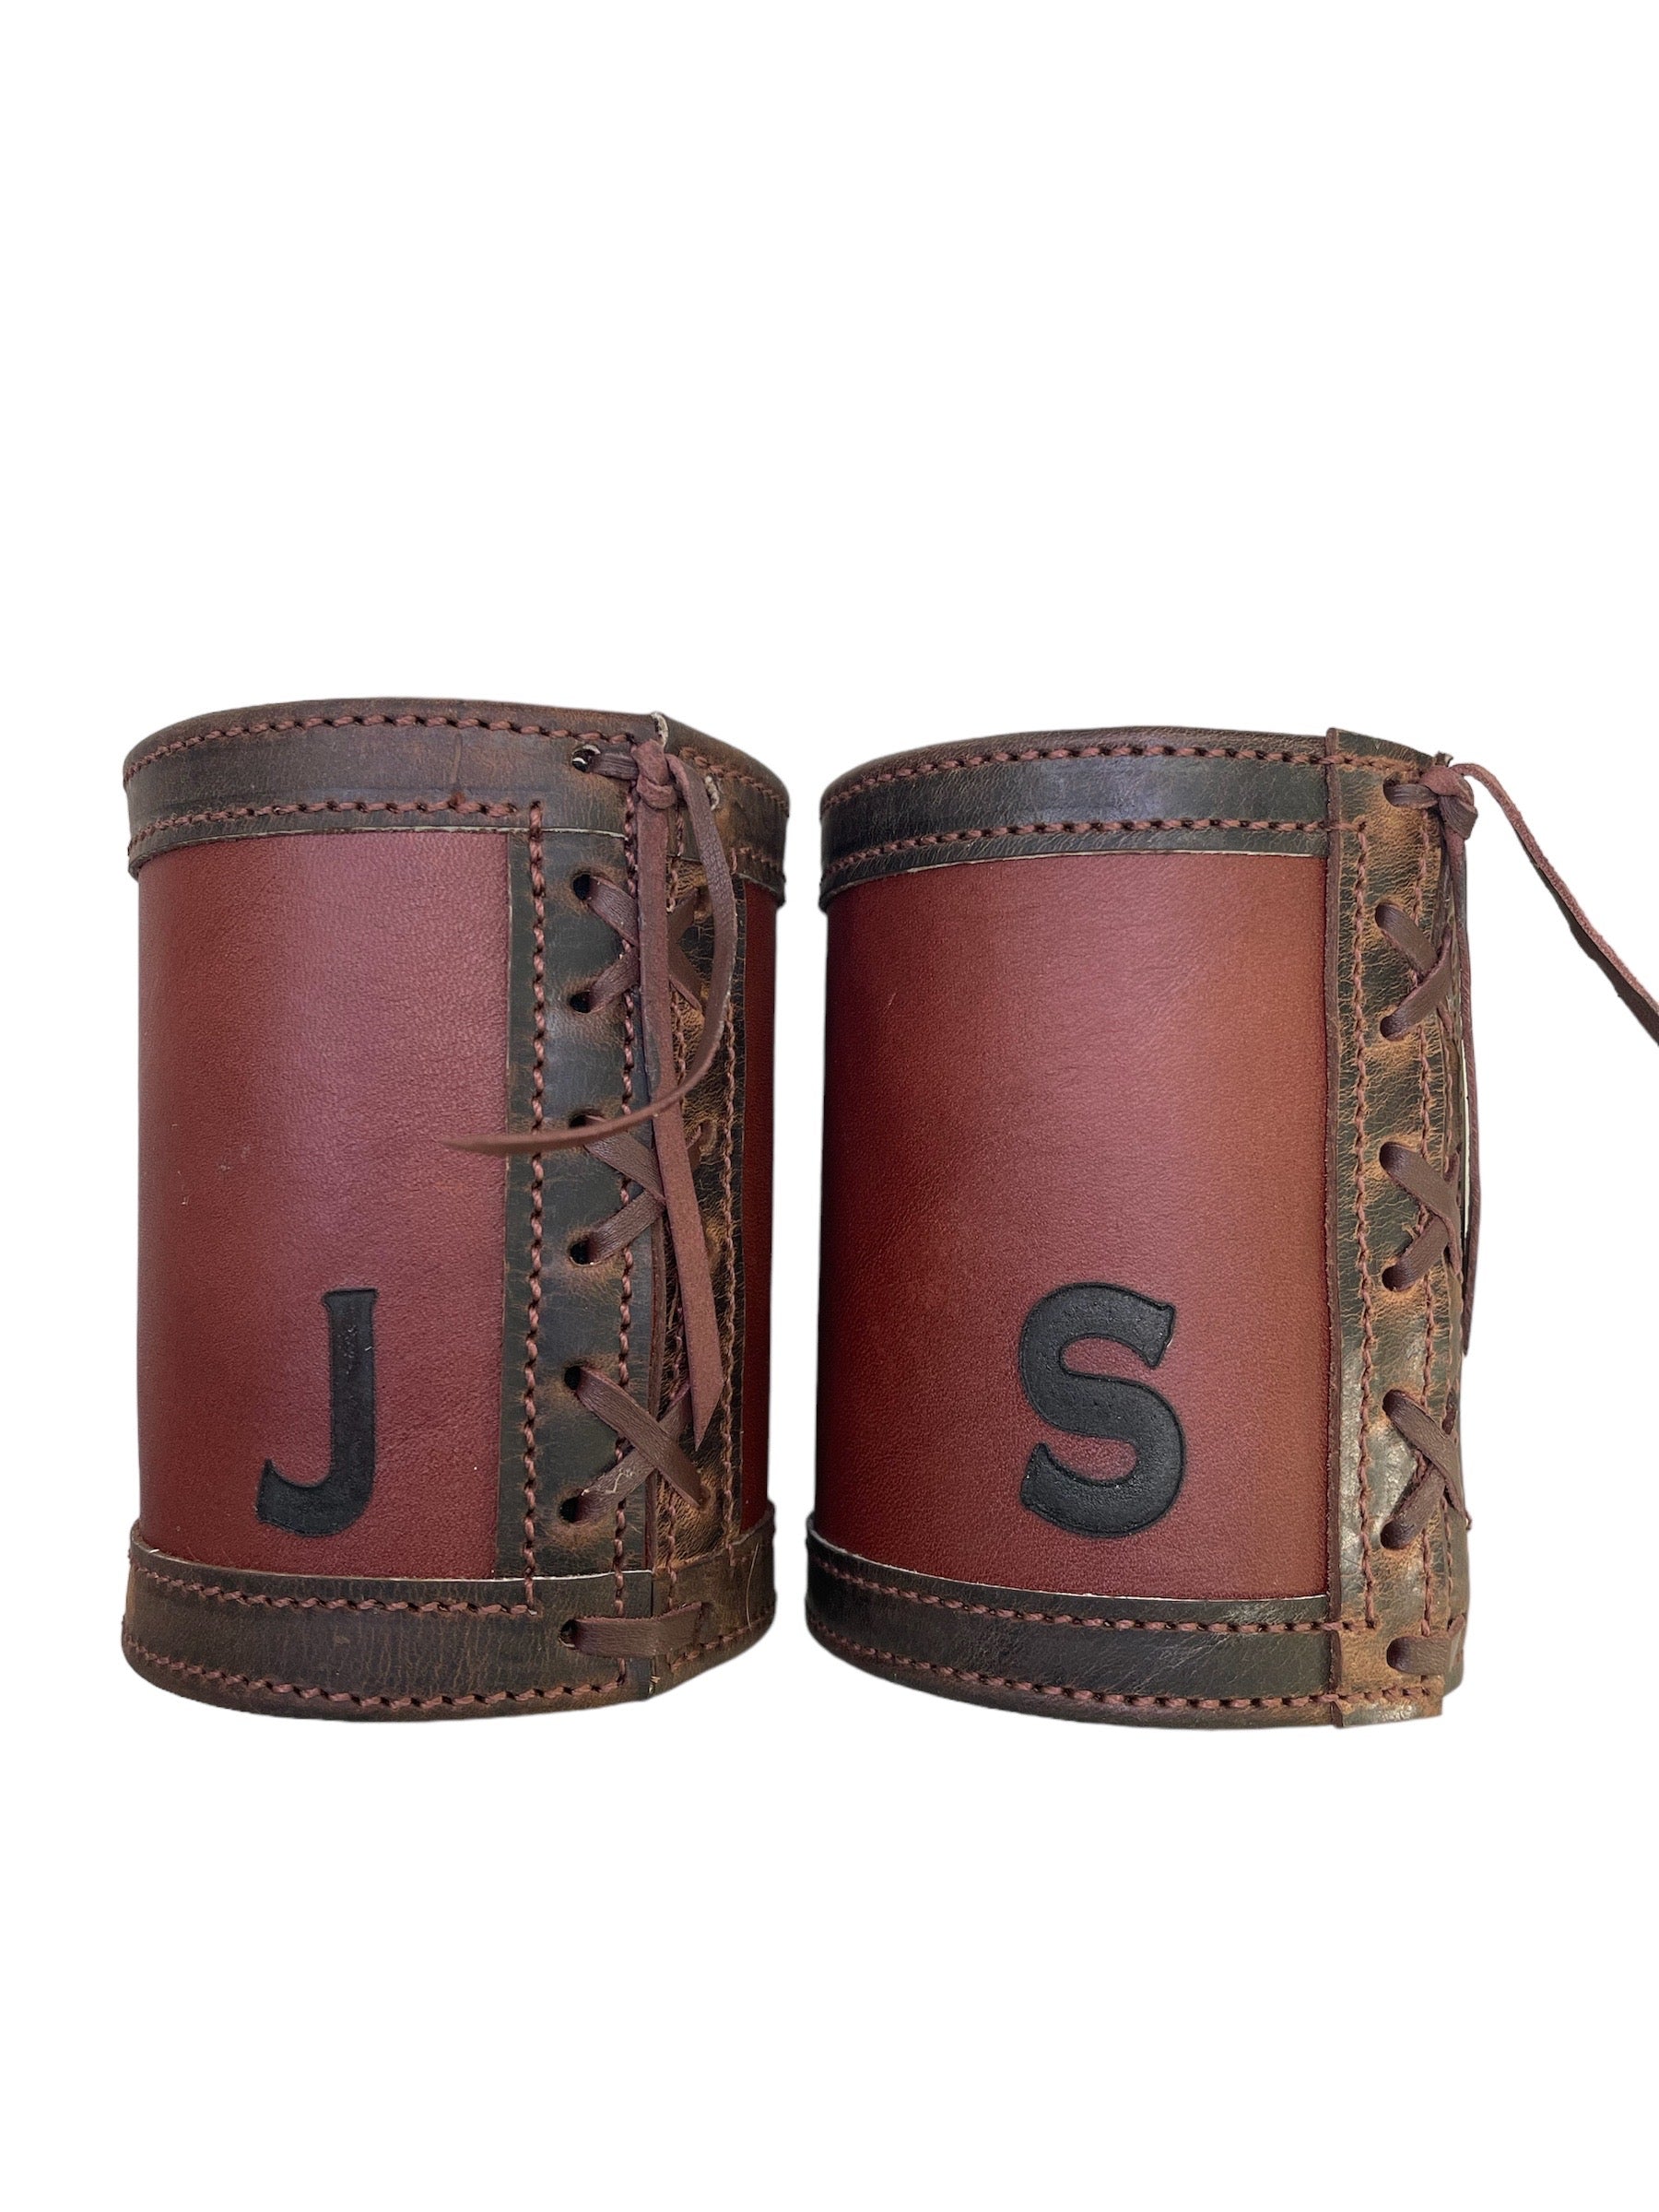 Branded Leather Can Coolers